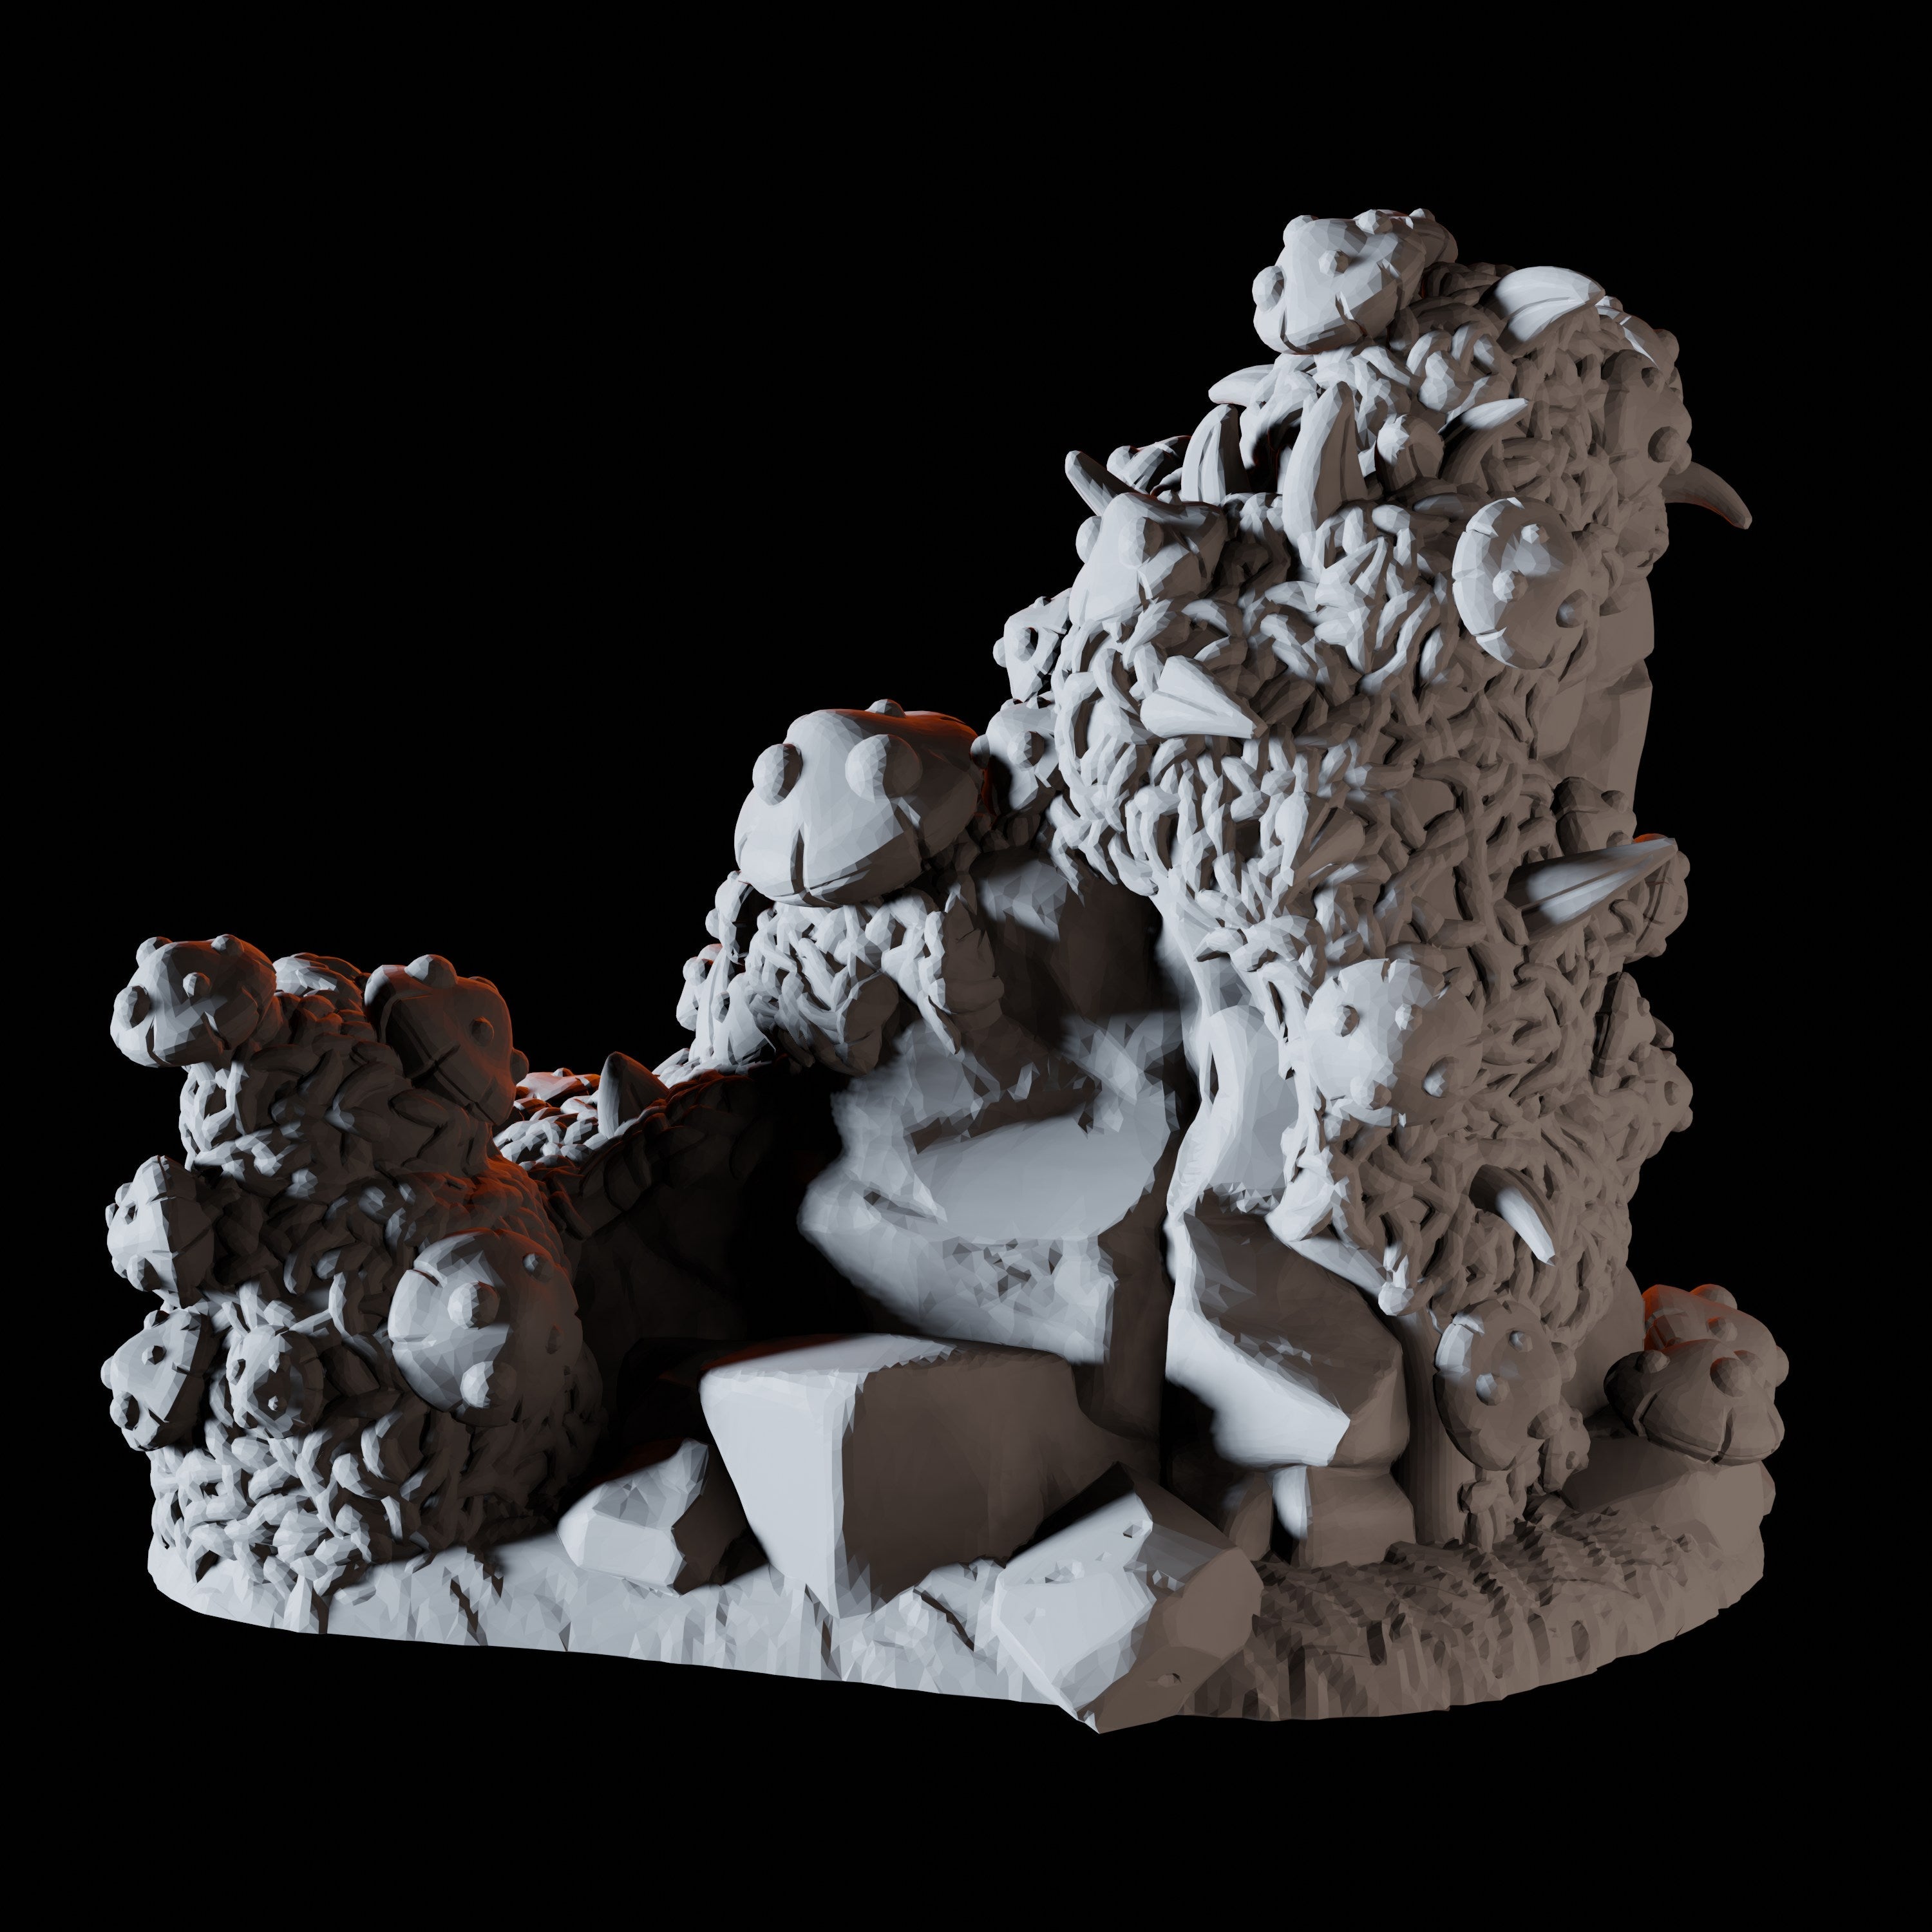 15 Underdark Scatter Terrain Pieces Miniature for Dungeons and Dragons, Pathfinder or other TTRPGs